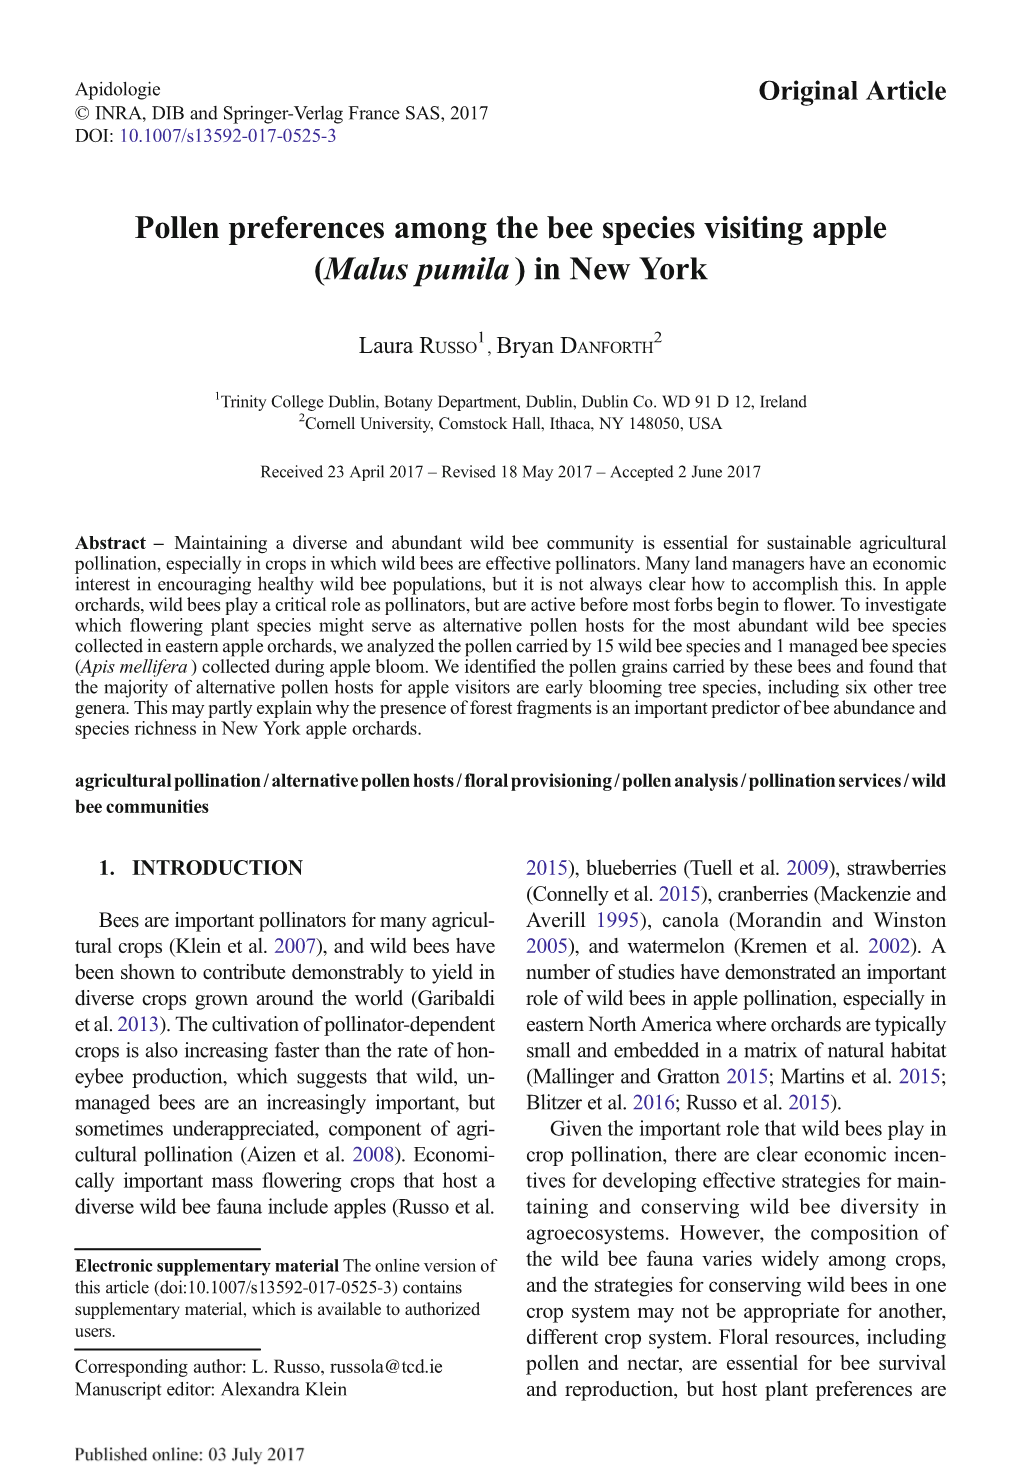 Pollen Preferences Among the Bee Species Visiting Apple (Malus Pumila )Innewyork